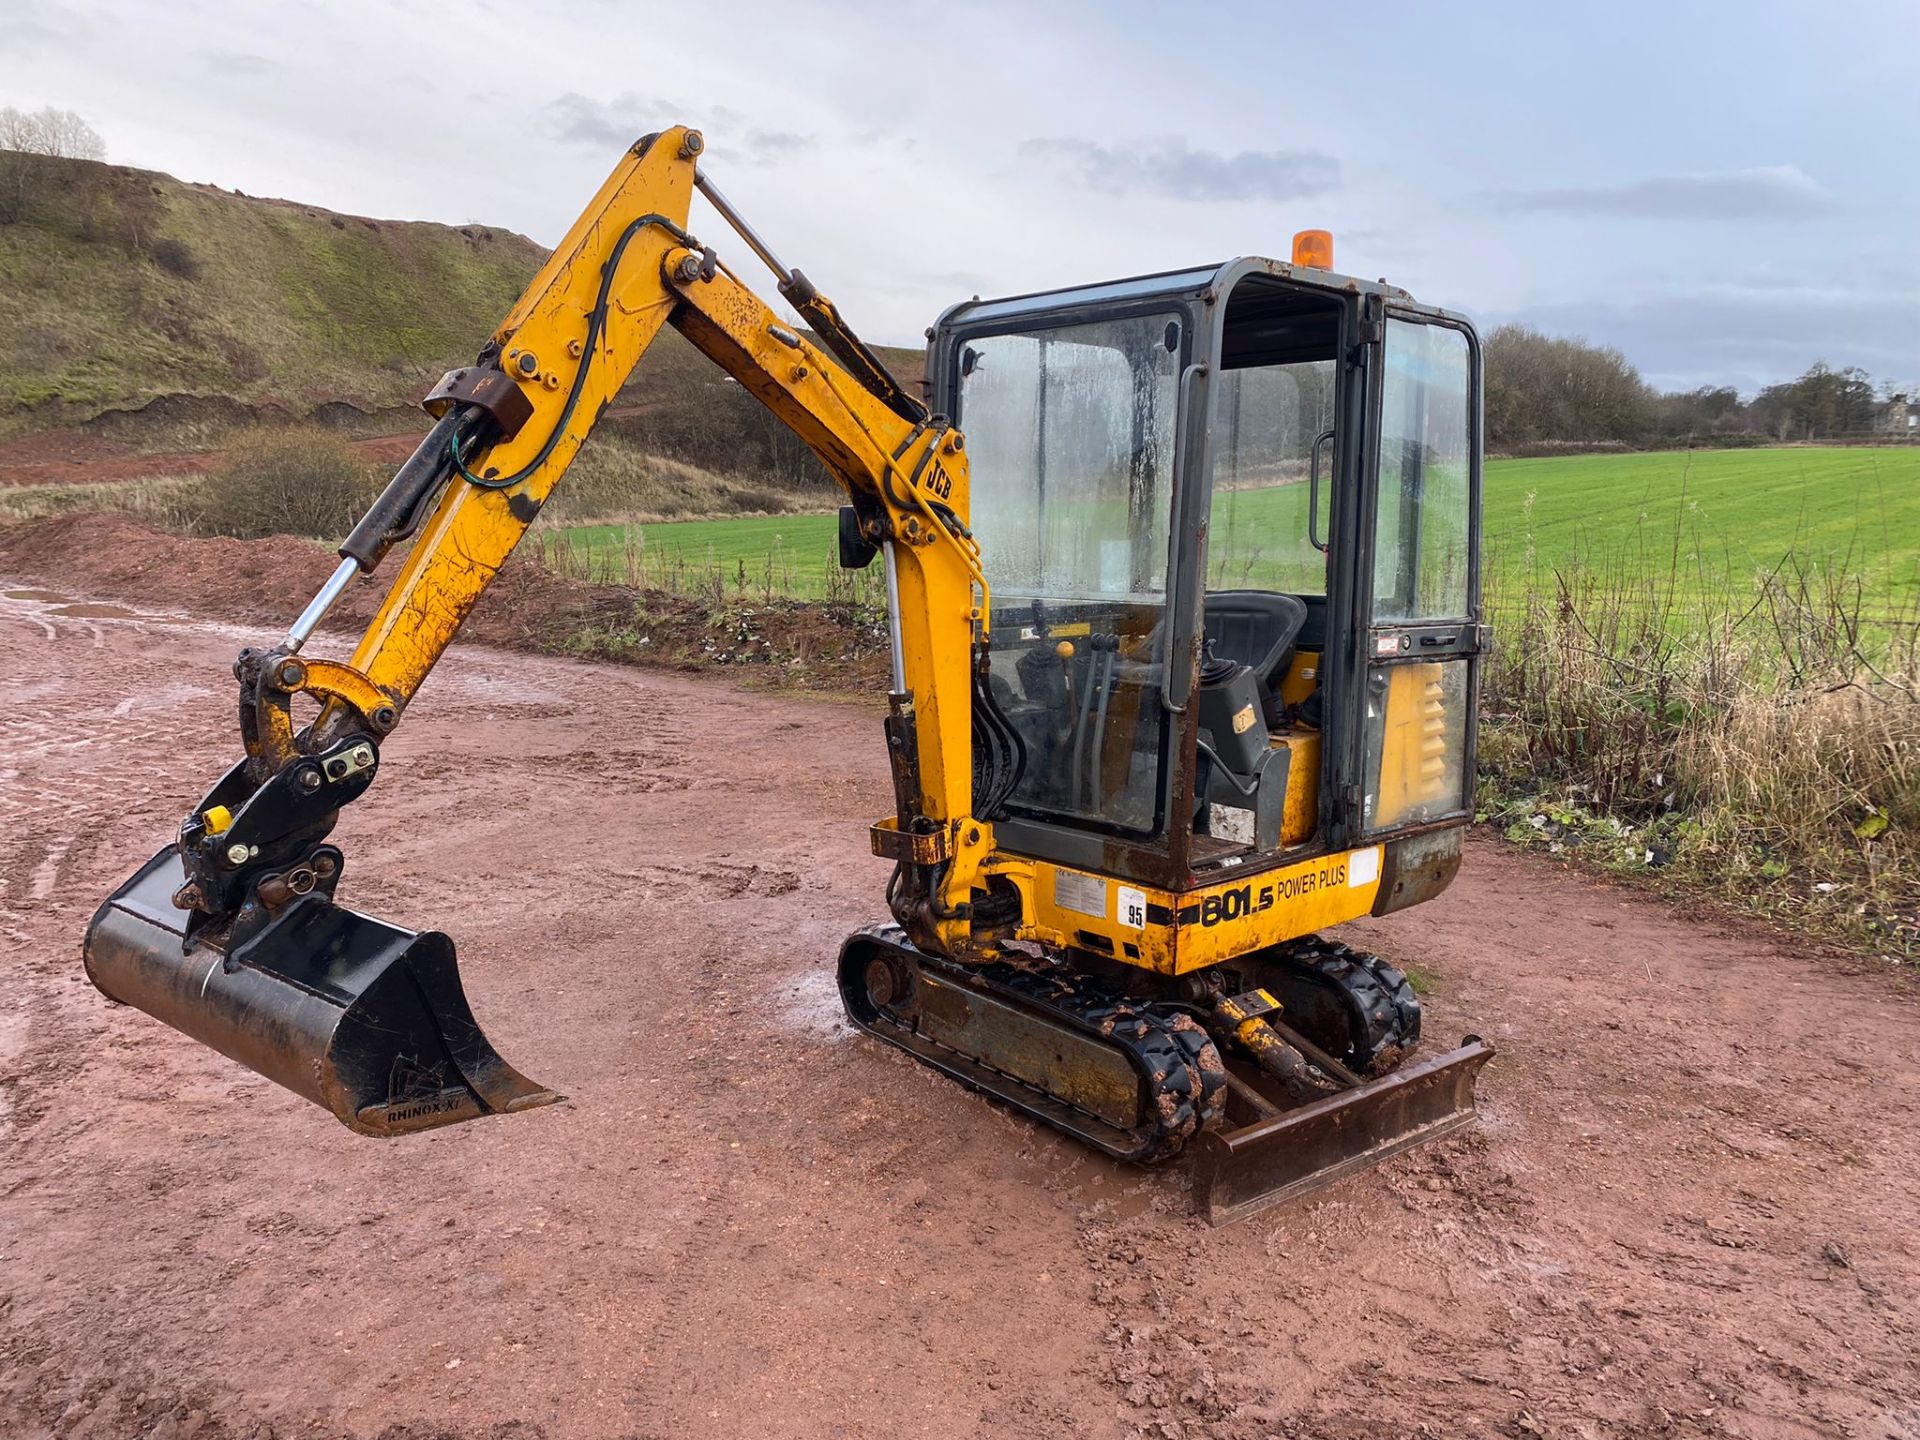 1997 JCB 801.5 POWER PLUS RUBBER TRACKED EXCAVATOR / DIGGER (P744 MVR) *PLUS VAT* - Image 5 of 18